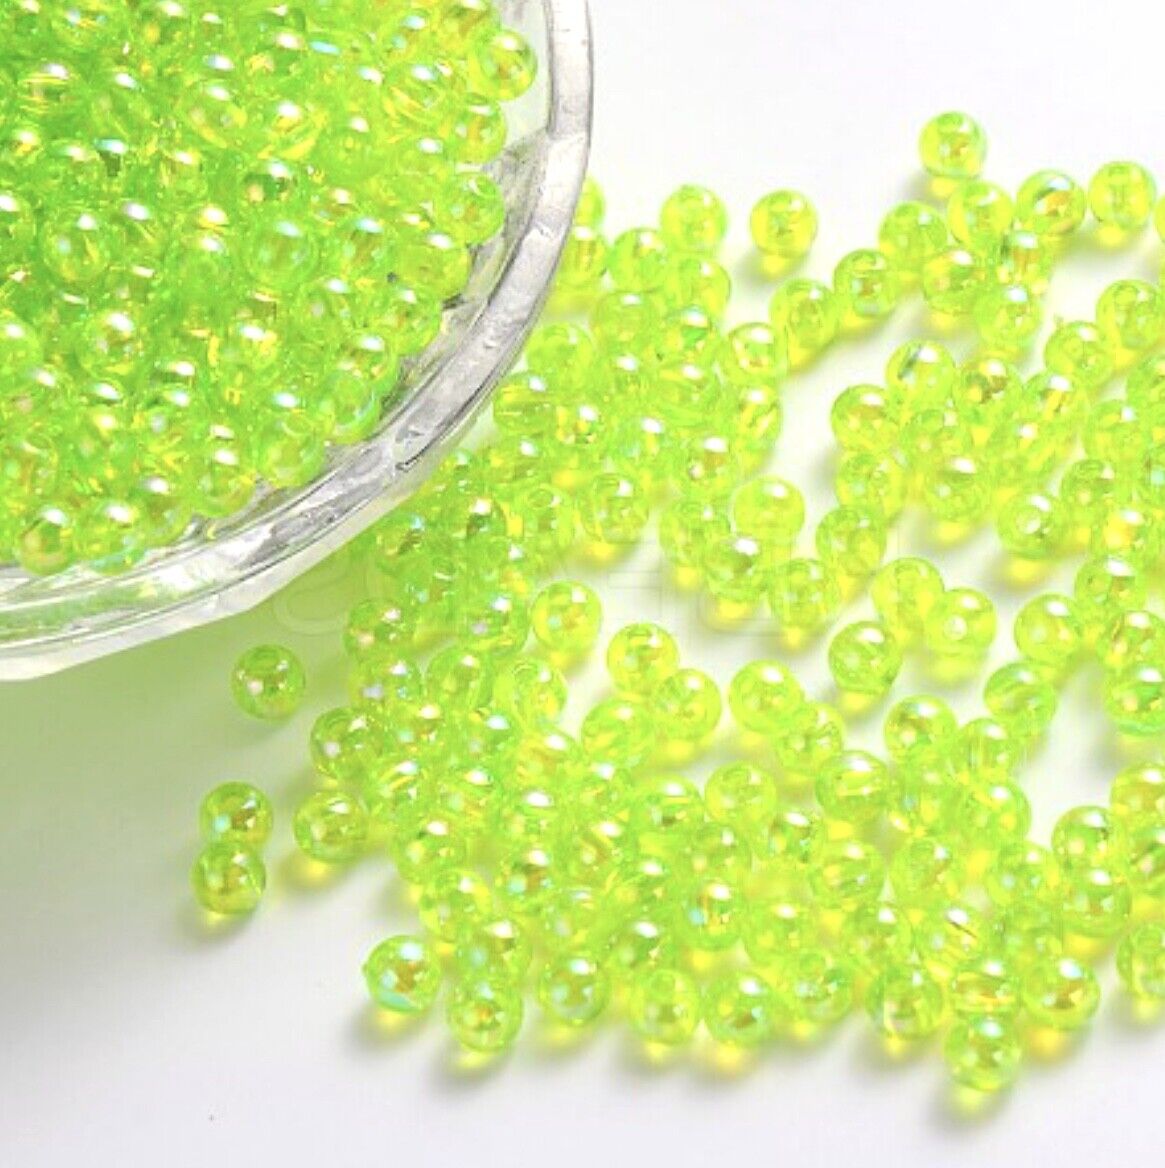 1000 pcs Small Acrylic 4mm Spacer Beads - Choose Iridescent, Pearl or Opaque